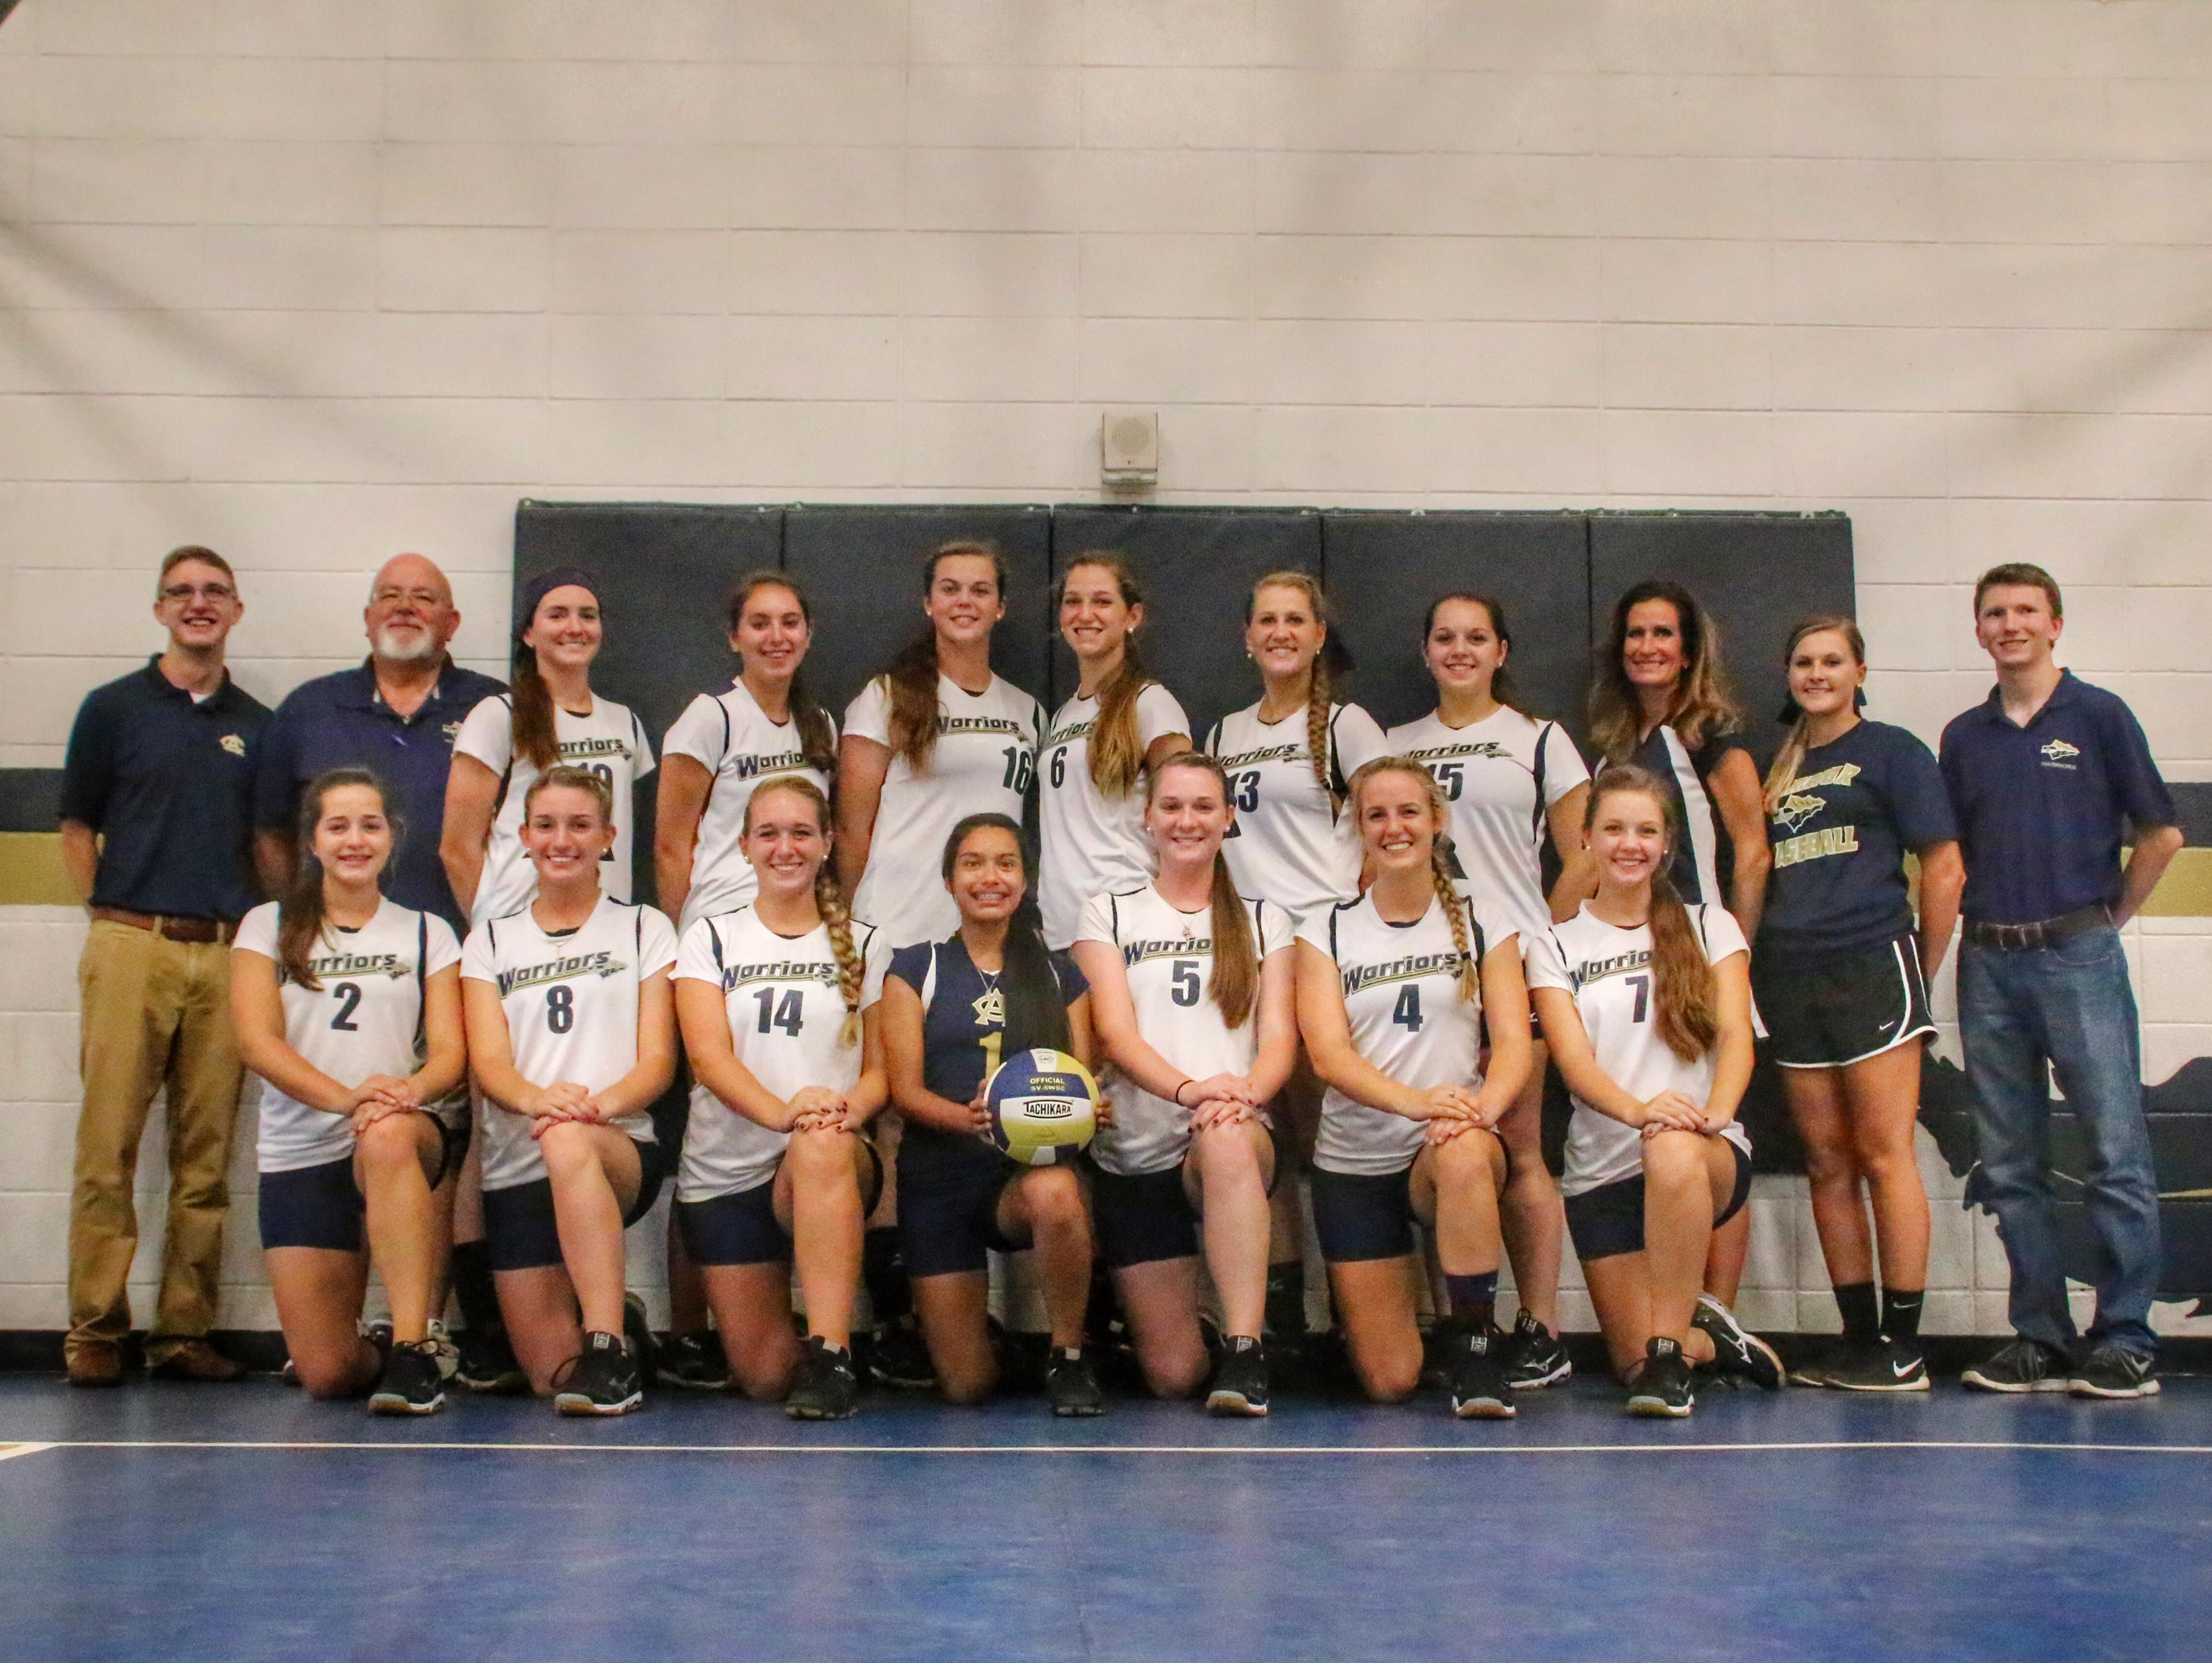 This is the first year that Aucilla Christian, with a 46-year school history, has a volleyball team.